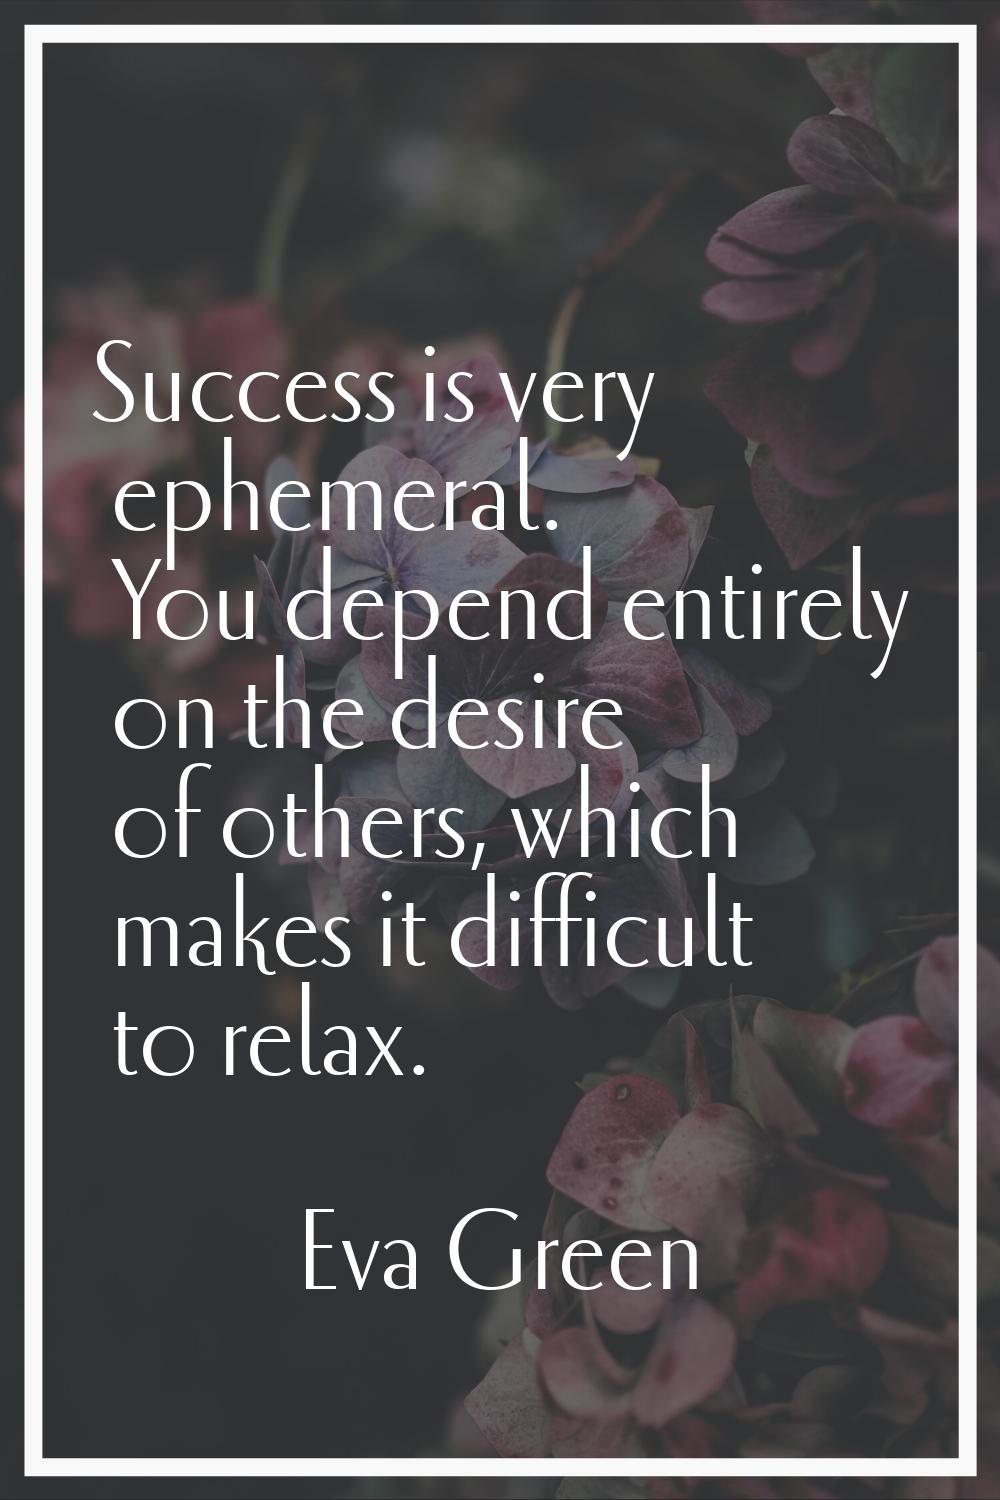 Success is very ephemeral. You depend entirely on the desire of others, which makes it difficult to